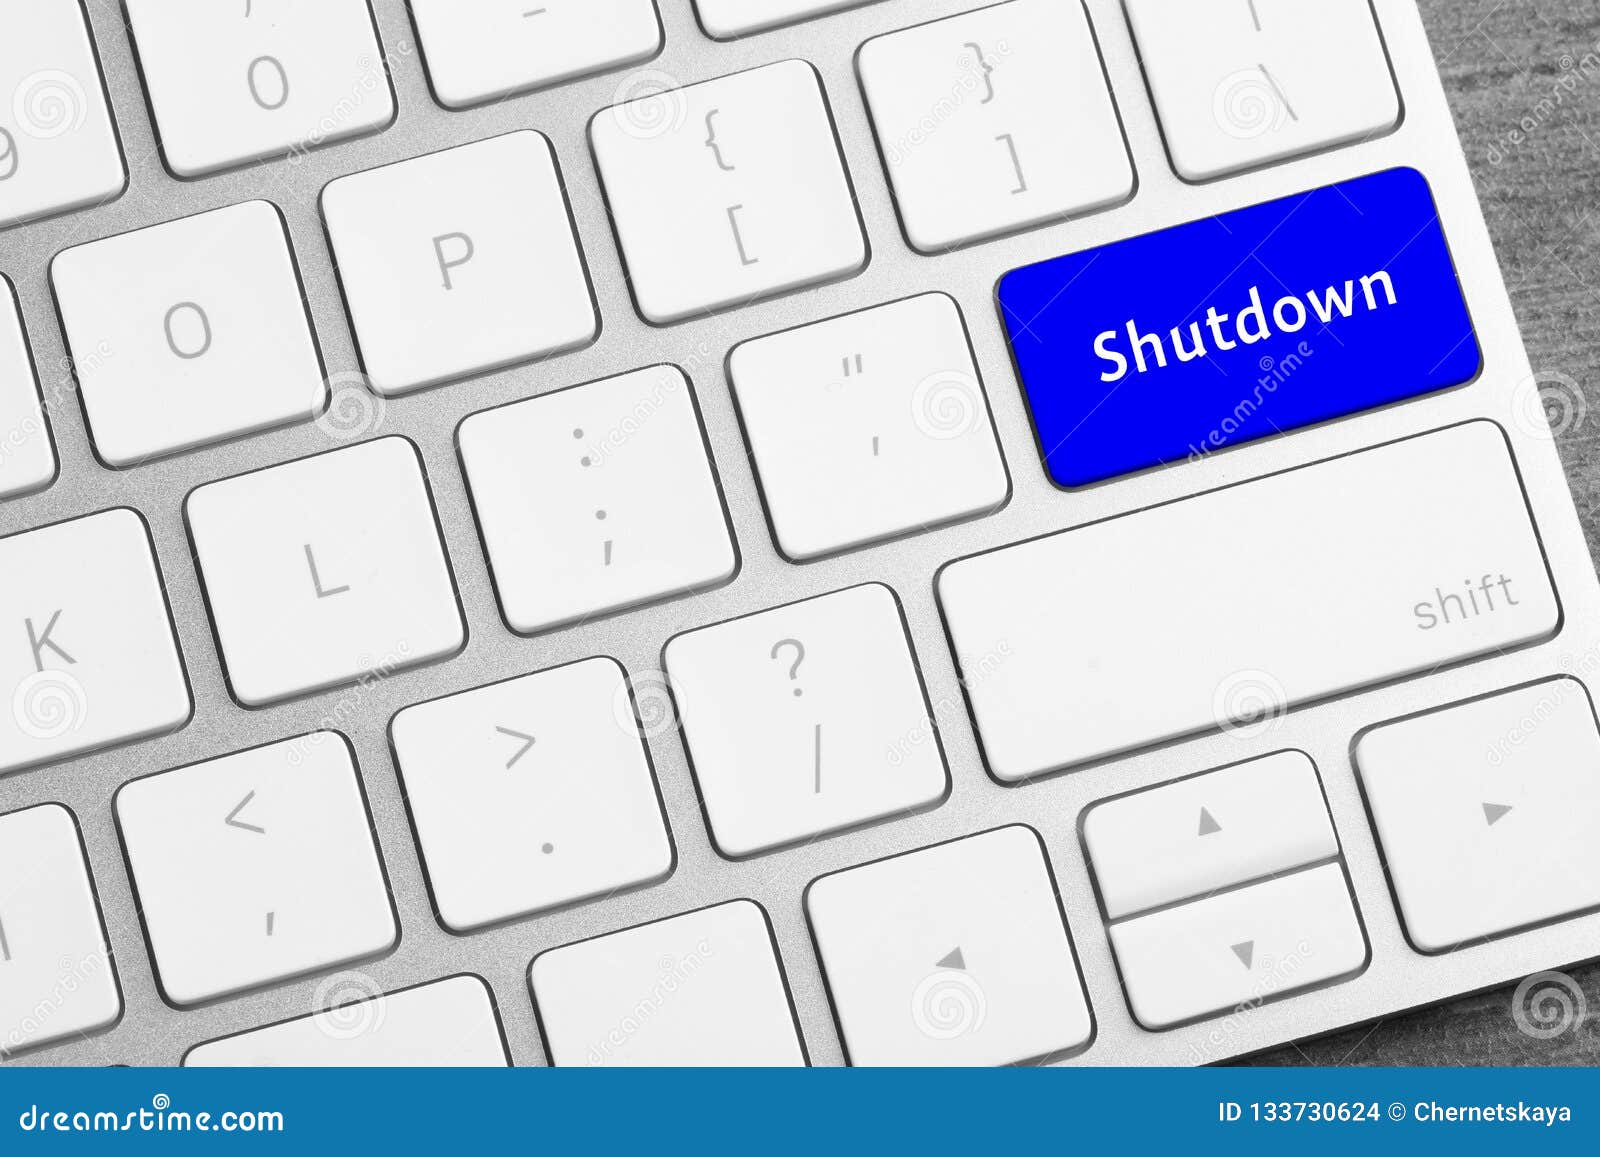 Computer Keyboard with SHUTDOWN Button Stock Photo - Image of control